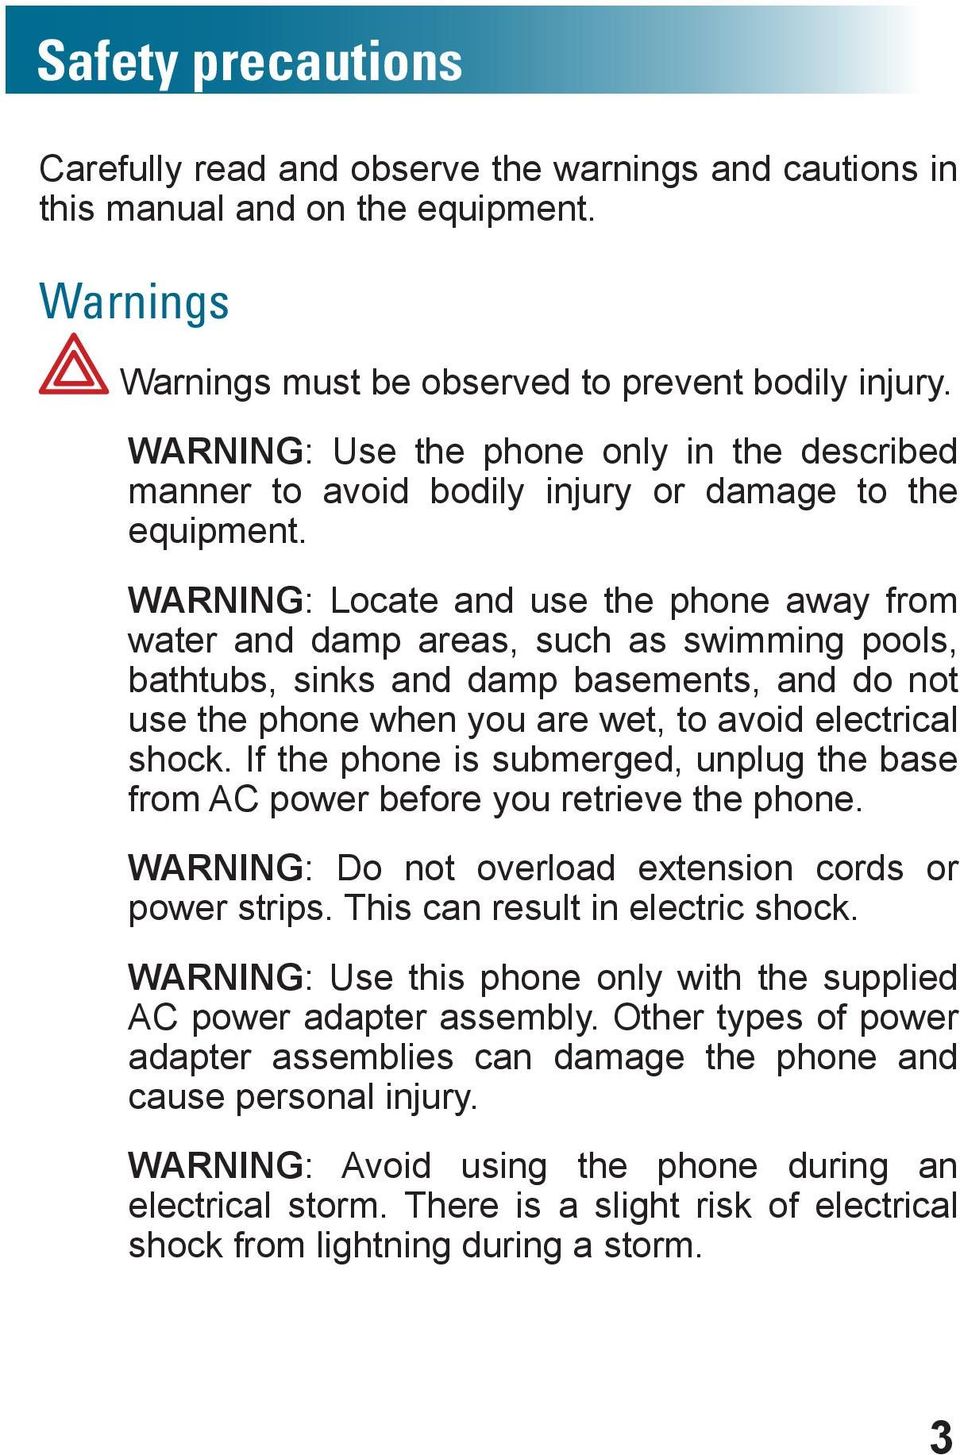 WARNING: Locate and use the phone away from water and damp areas, such as swimming pools, bathtubs, sinks and damp basements, and do not use the phone when you are wet, to avoid electrical shock.